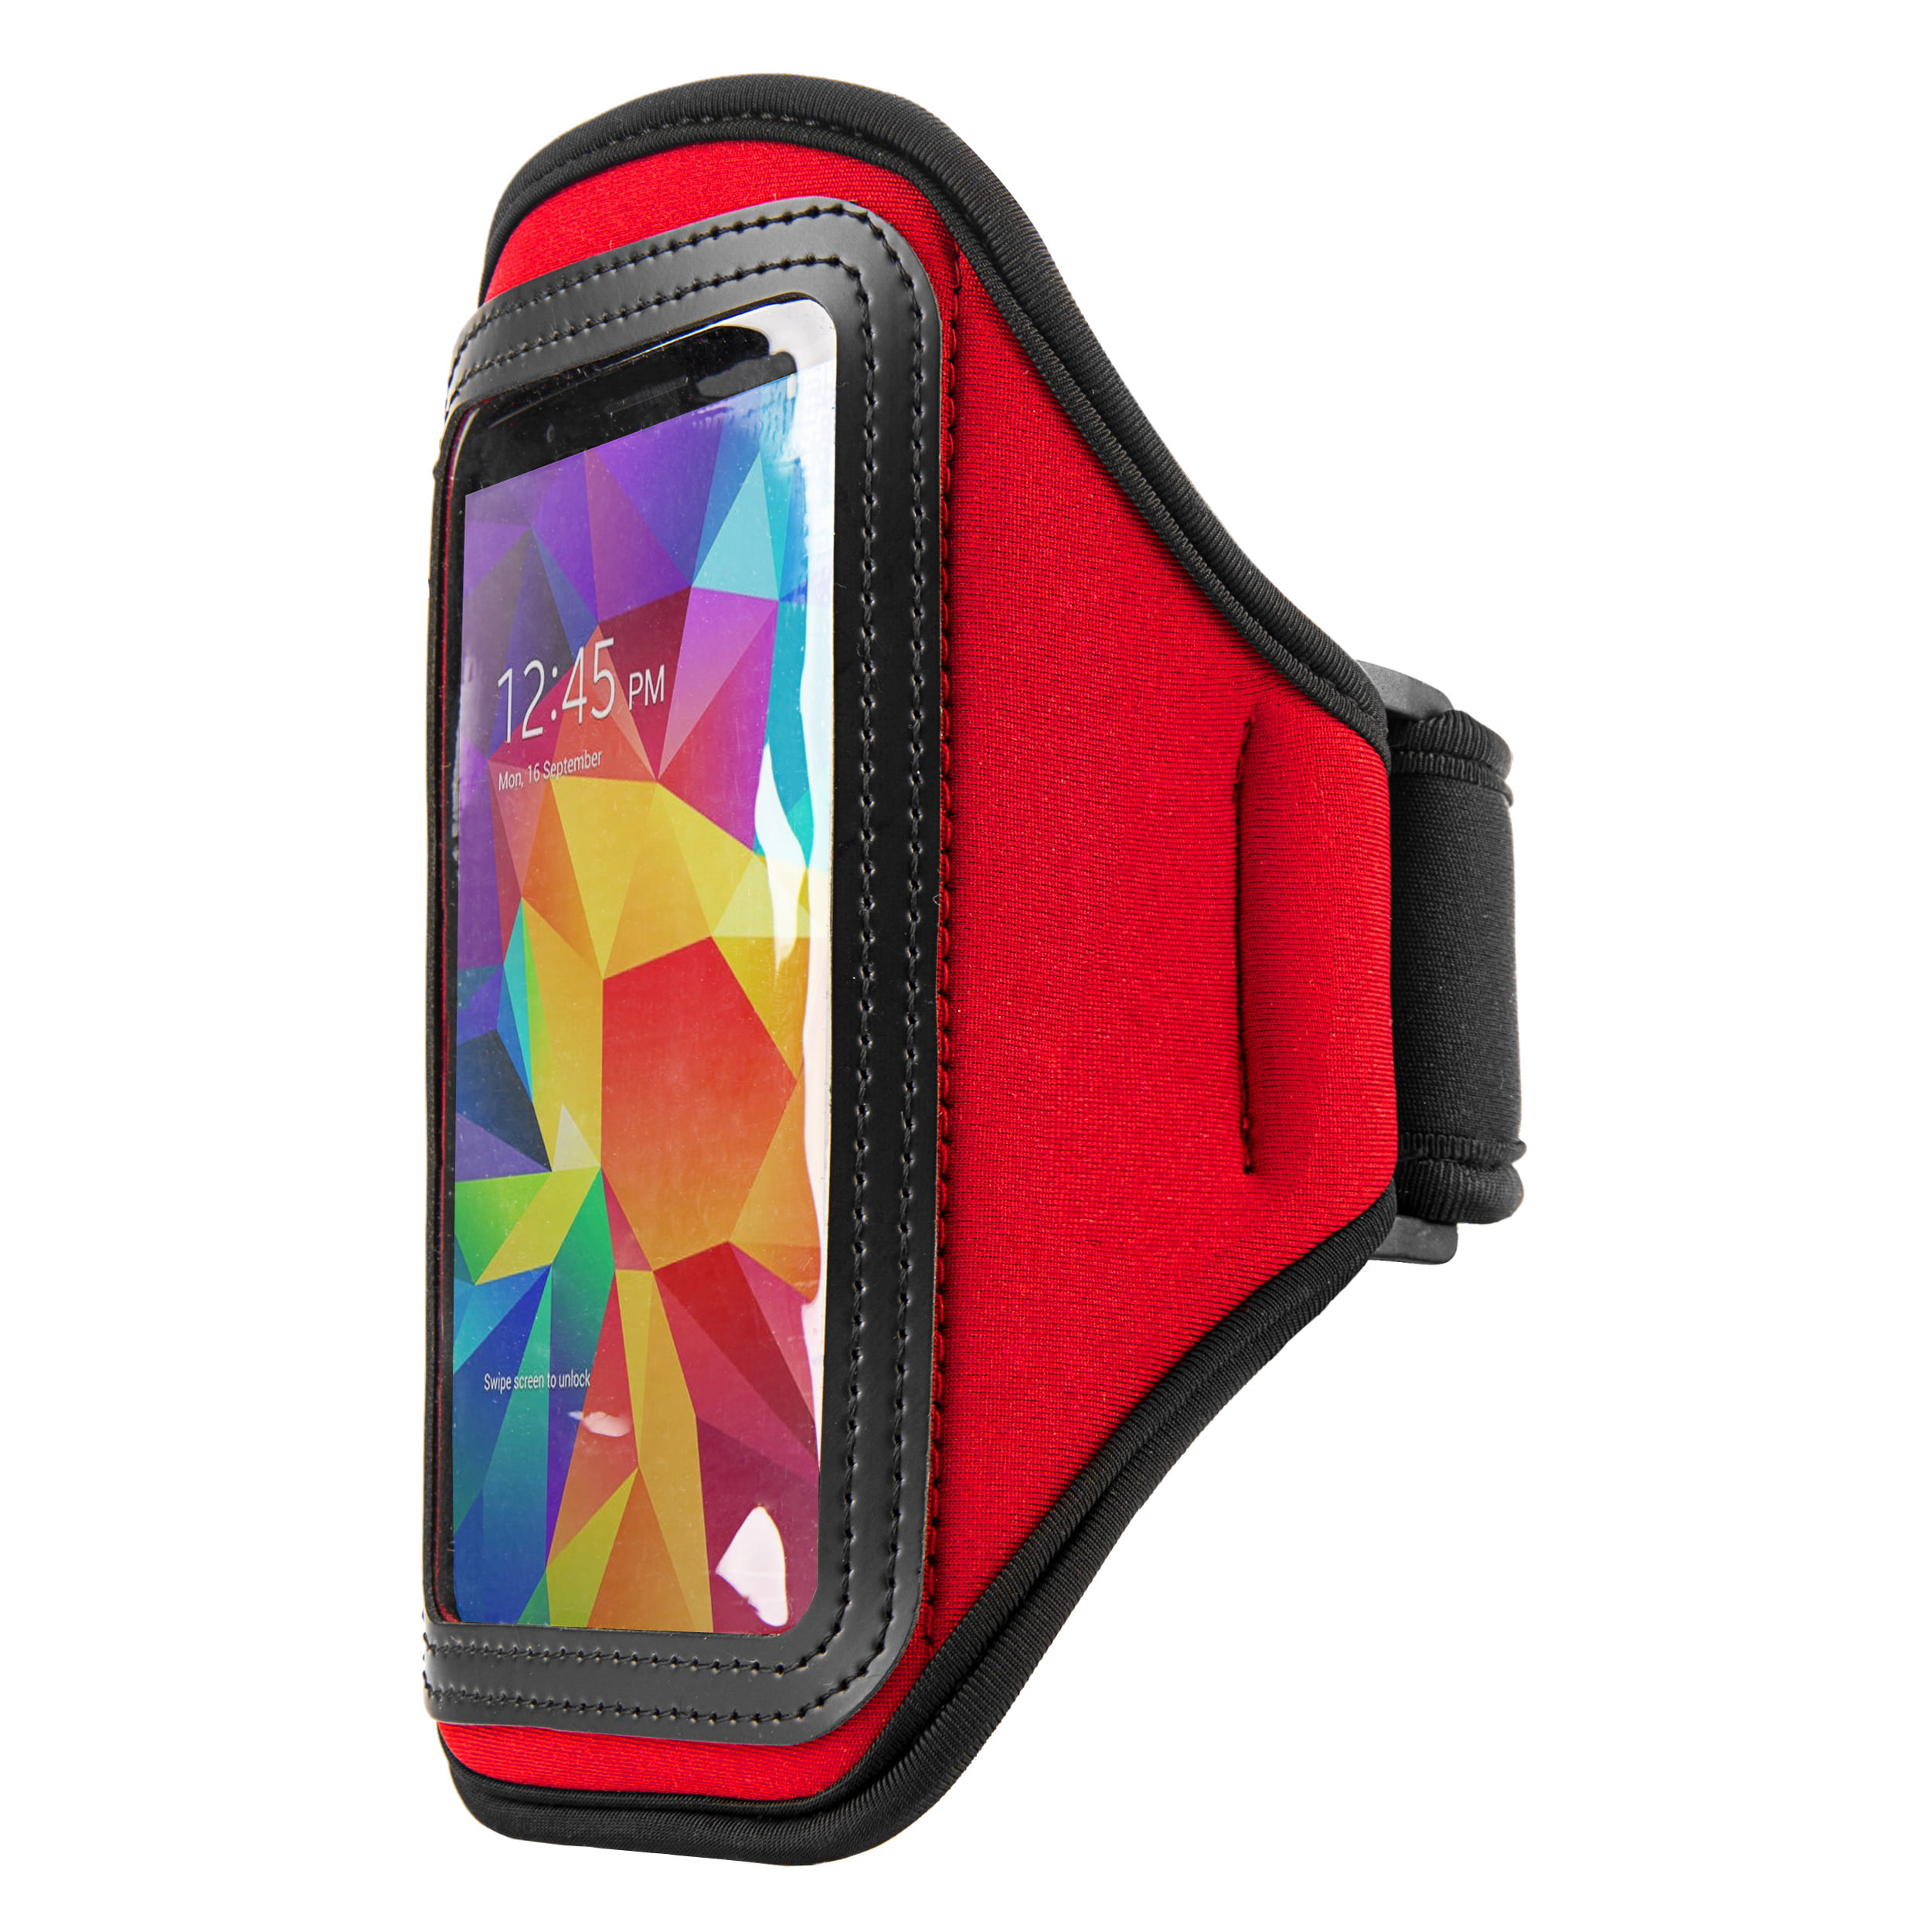 Quality Gym Running Sports Workout Armband Phone Case Cover SONY XPERIA XA2 